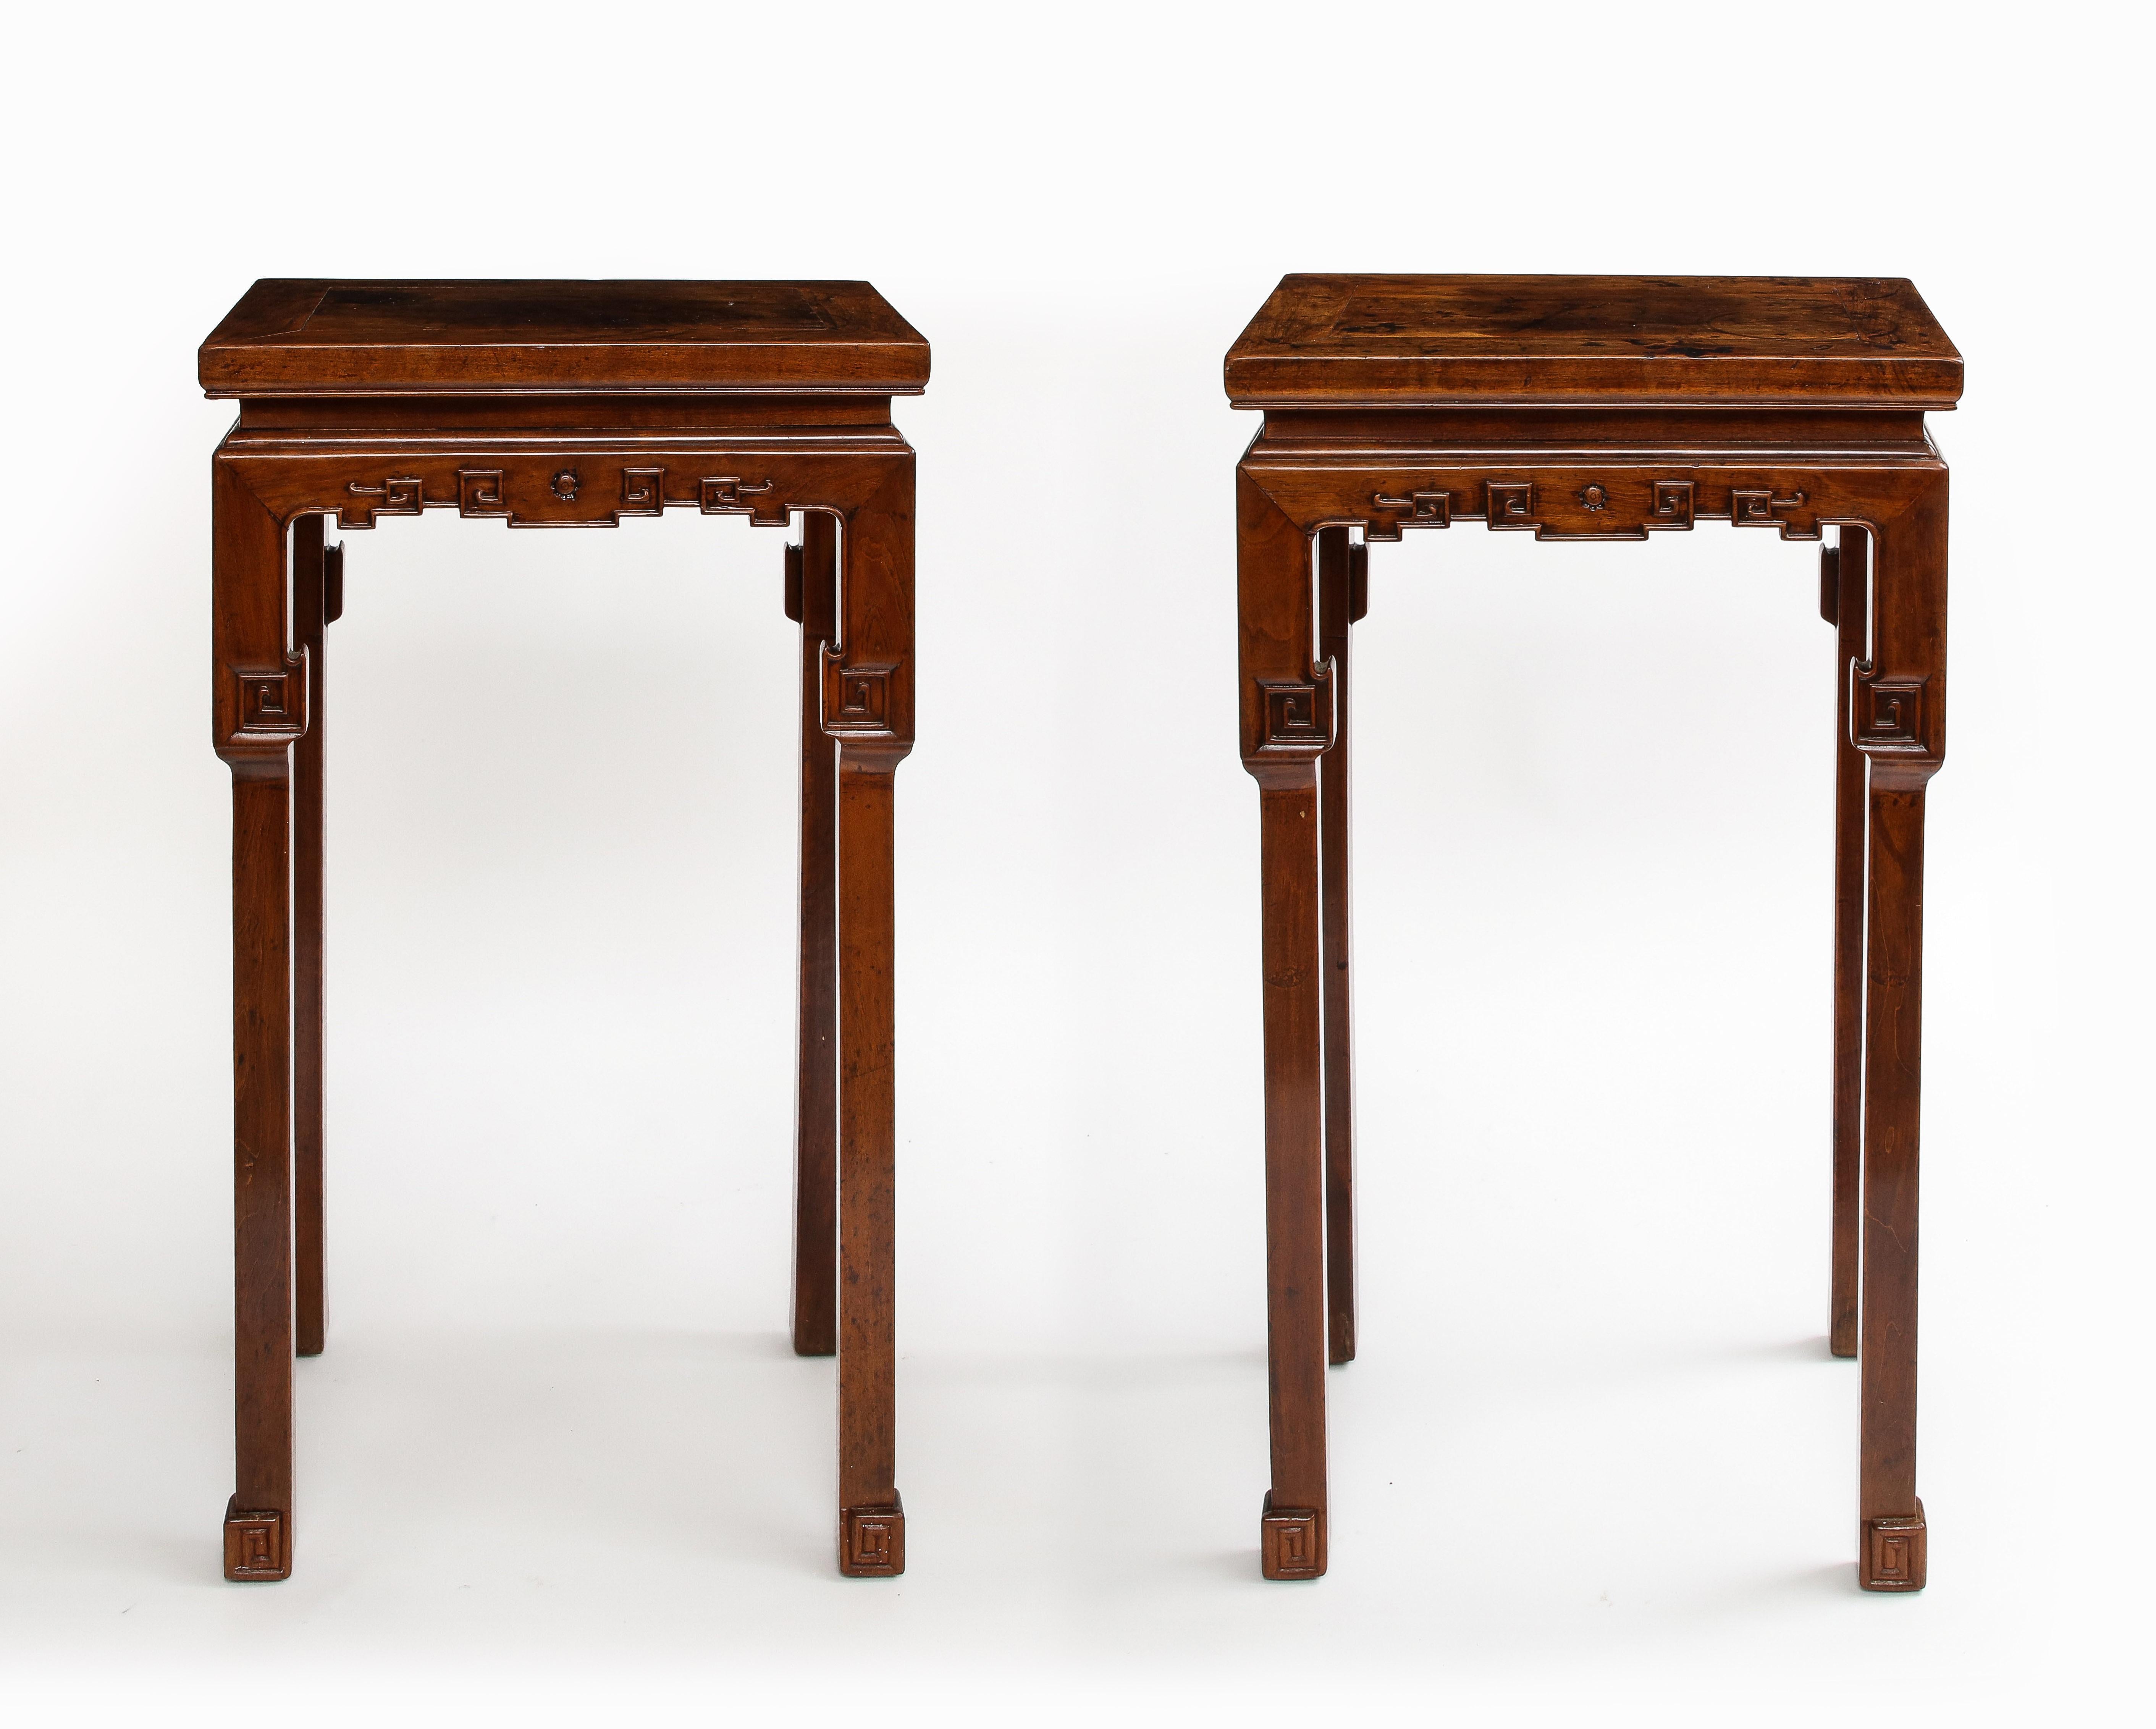 A Wonderful Pair of 19th Century Qing Dynasty Chinese Carved Hardwood Pedestals, with Provenance from a Private Collection in Texas.  Possibly Huanghuali. Standing tall the pedestals exude an air of sophistication, with matching designs that